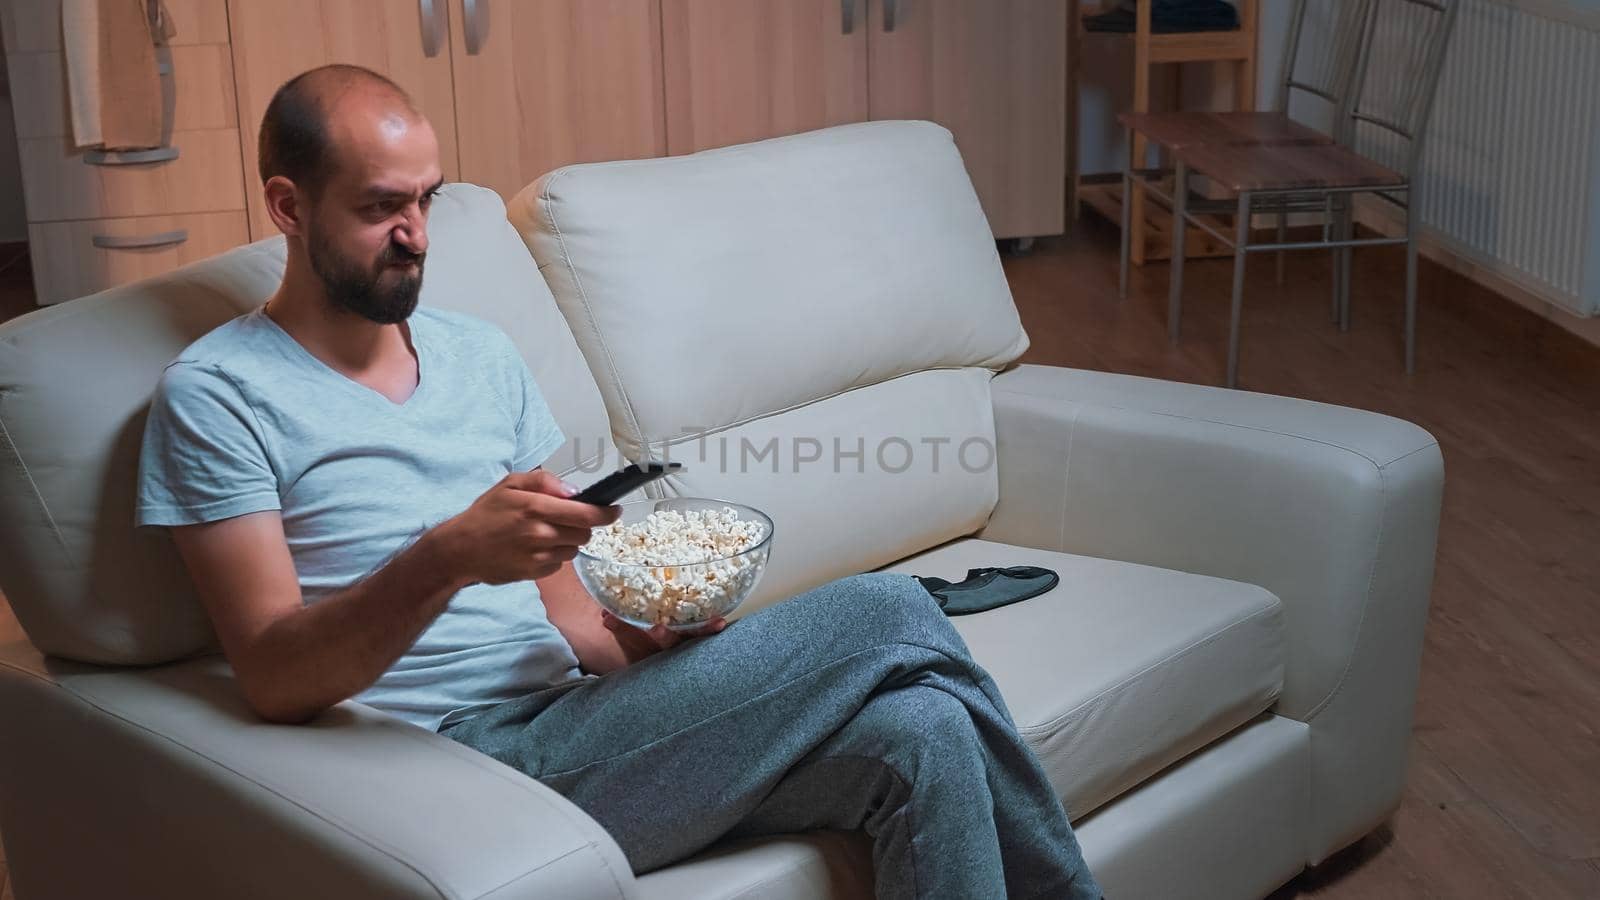 Concentrated man sitting in front of television using control remote while watching movie film. Caucasian male in pajamas looking at entertainment shows late at night in kitchen